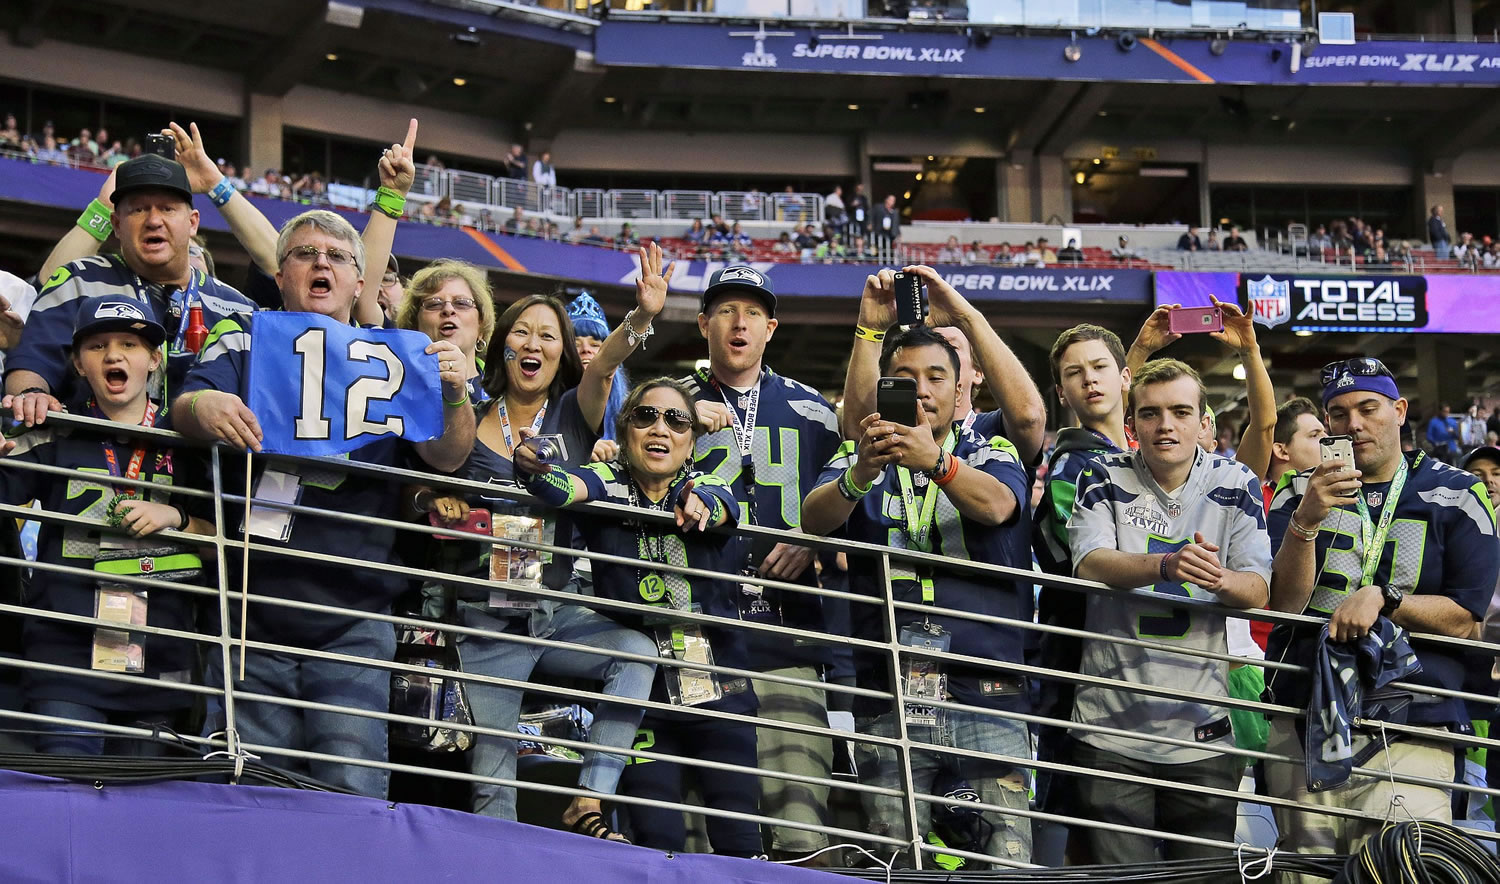 Seahawks fans quickly filled up the stadium Sunday before the Super Bowl.